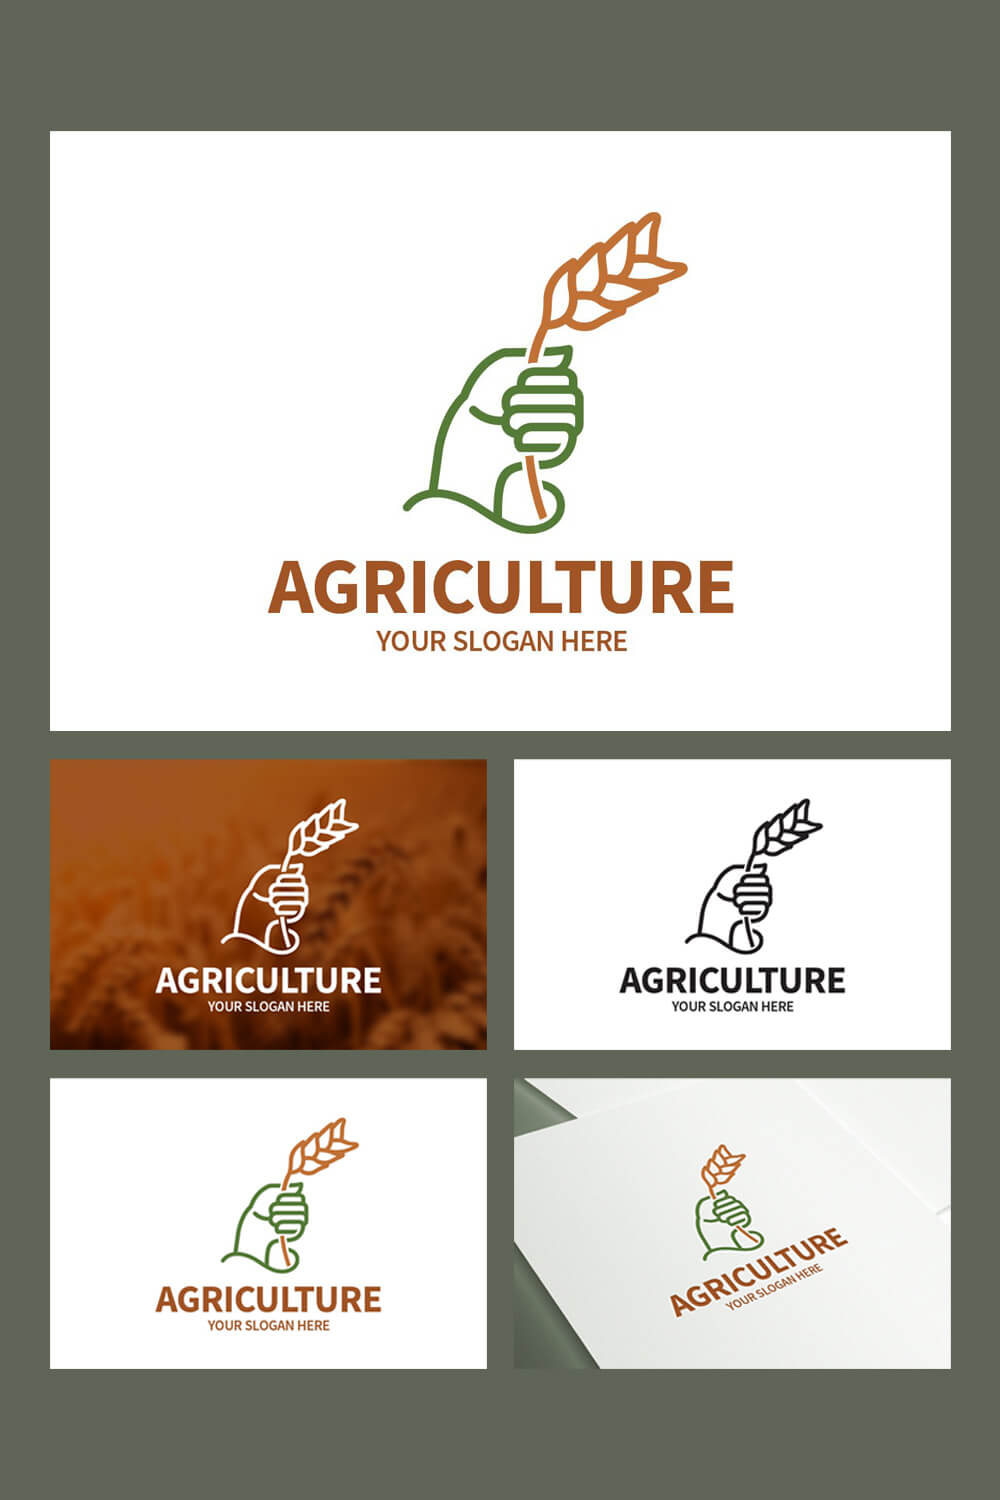 A large agriculture logo on a white background, as well as a small logo on a wheat field background, black and white logo and color on paper.